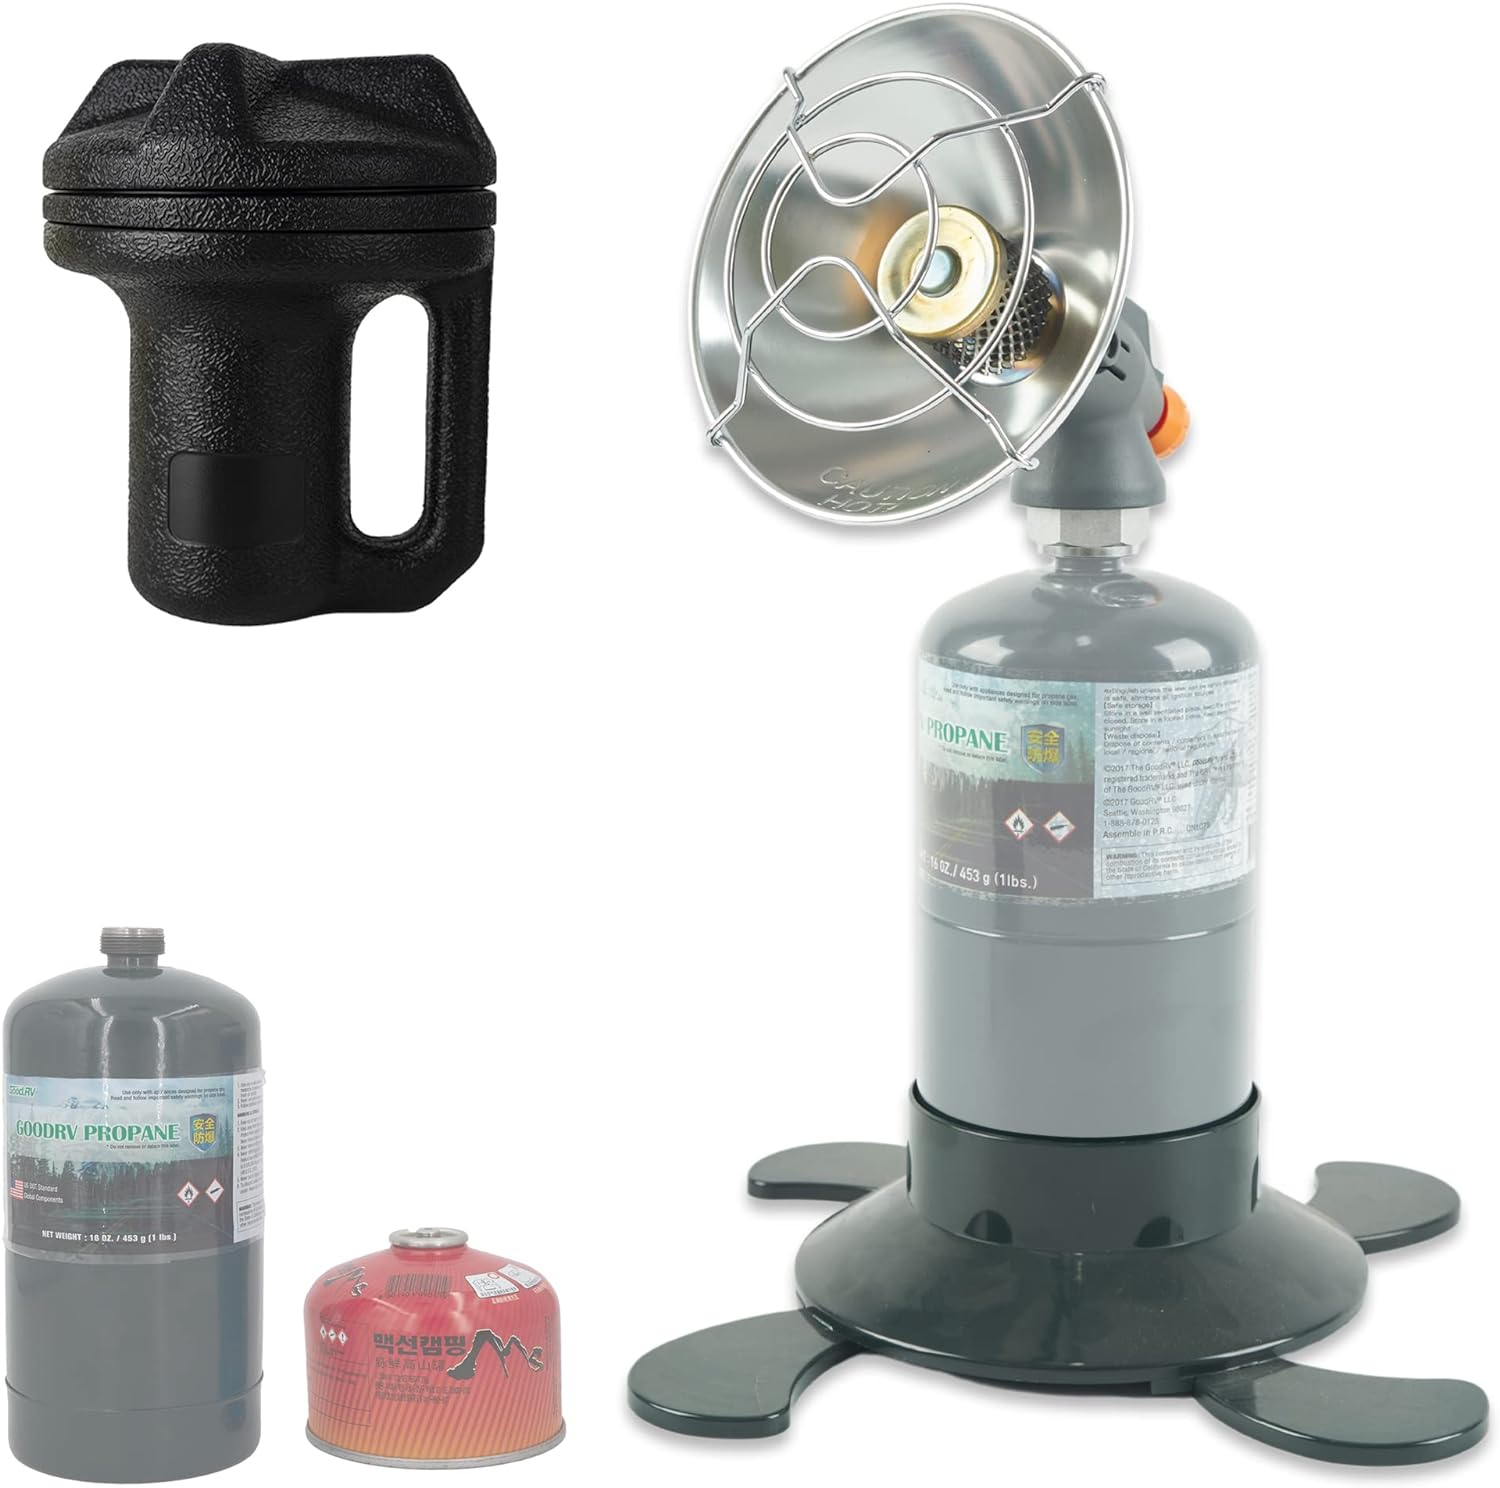 Portable Propane Heater For Outdoor Review